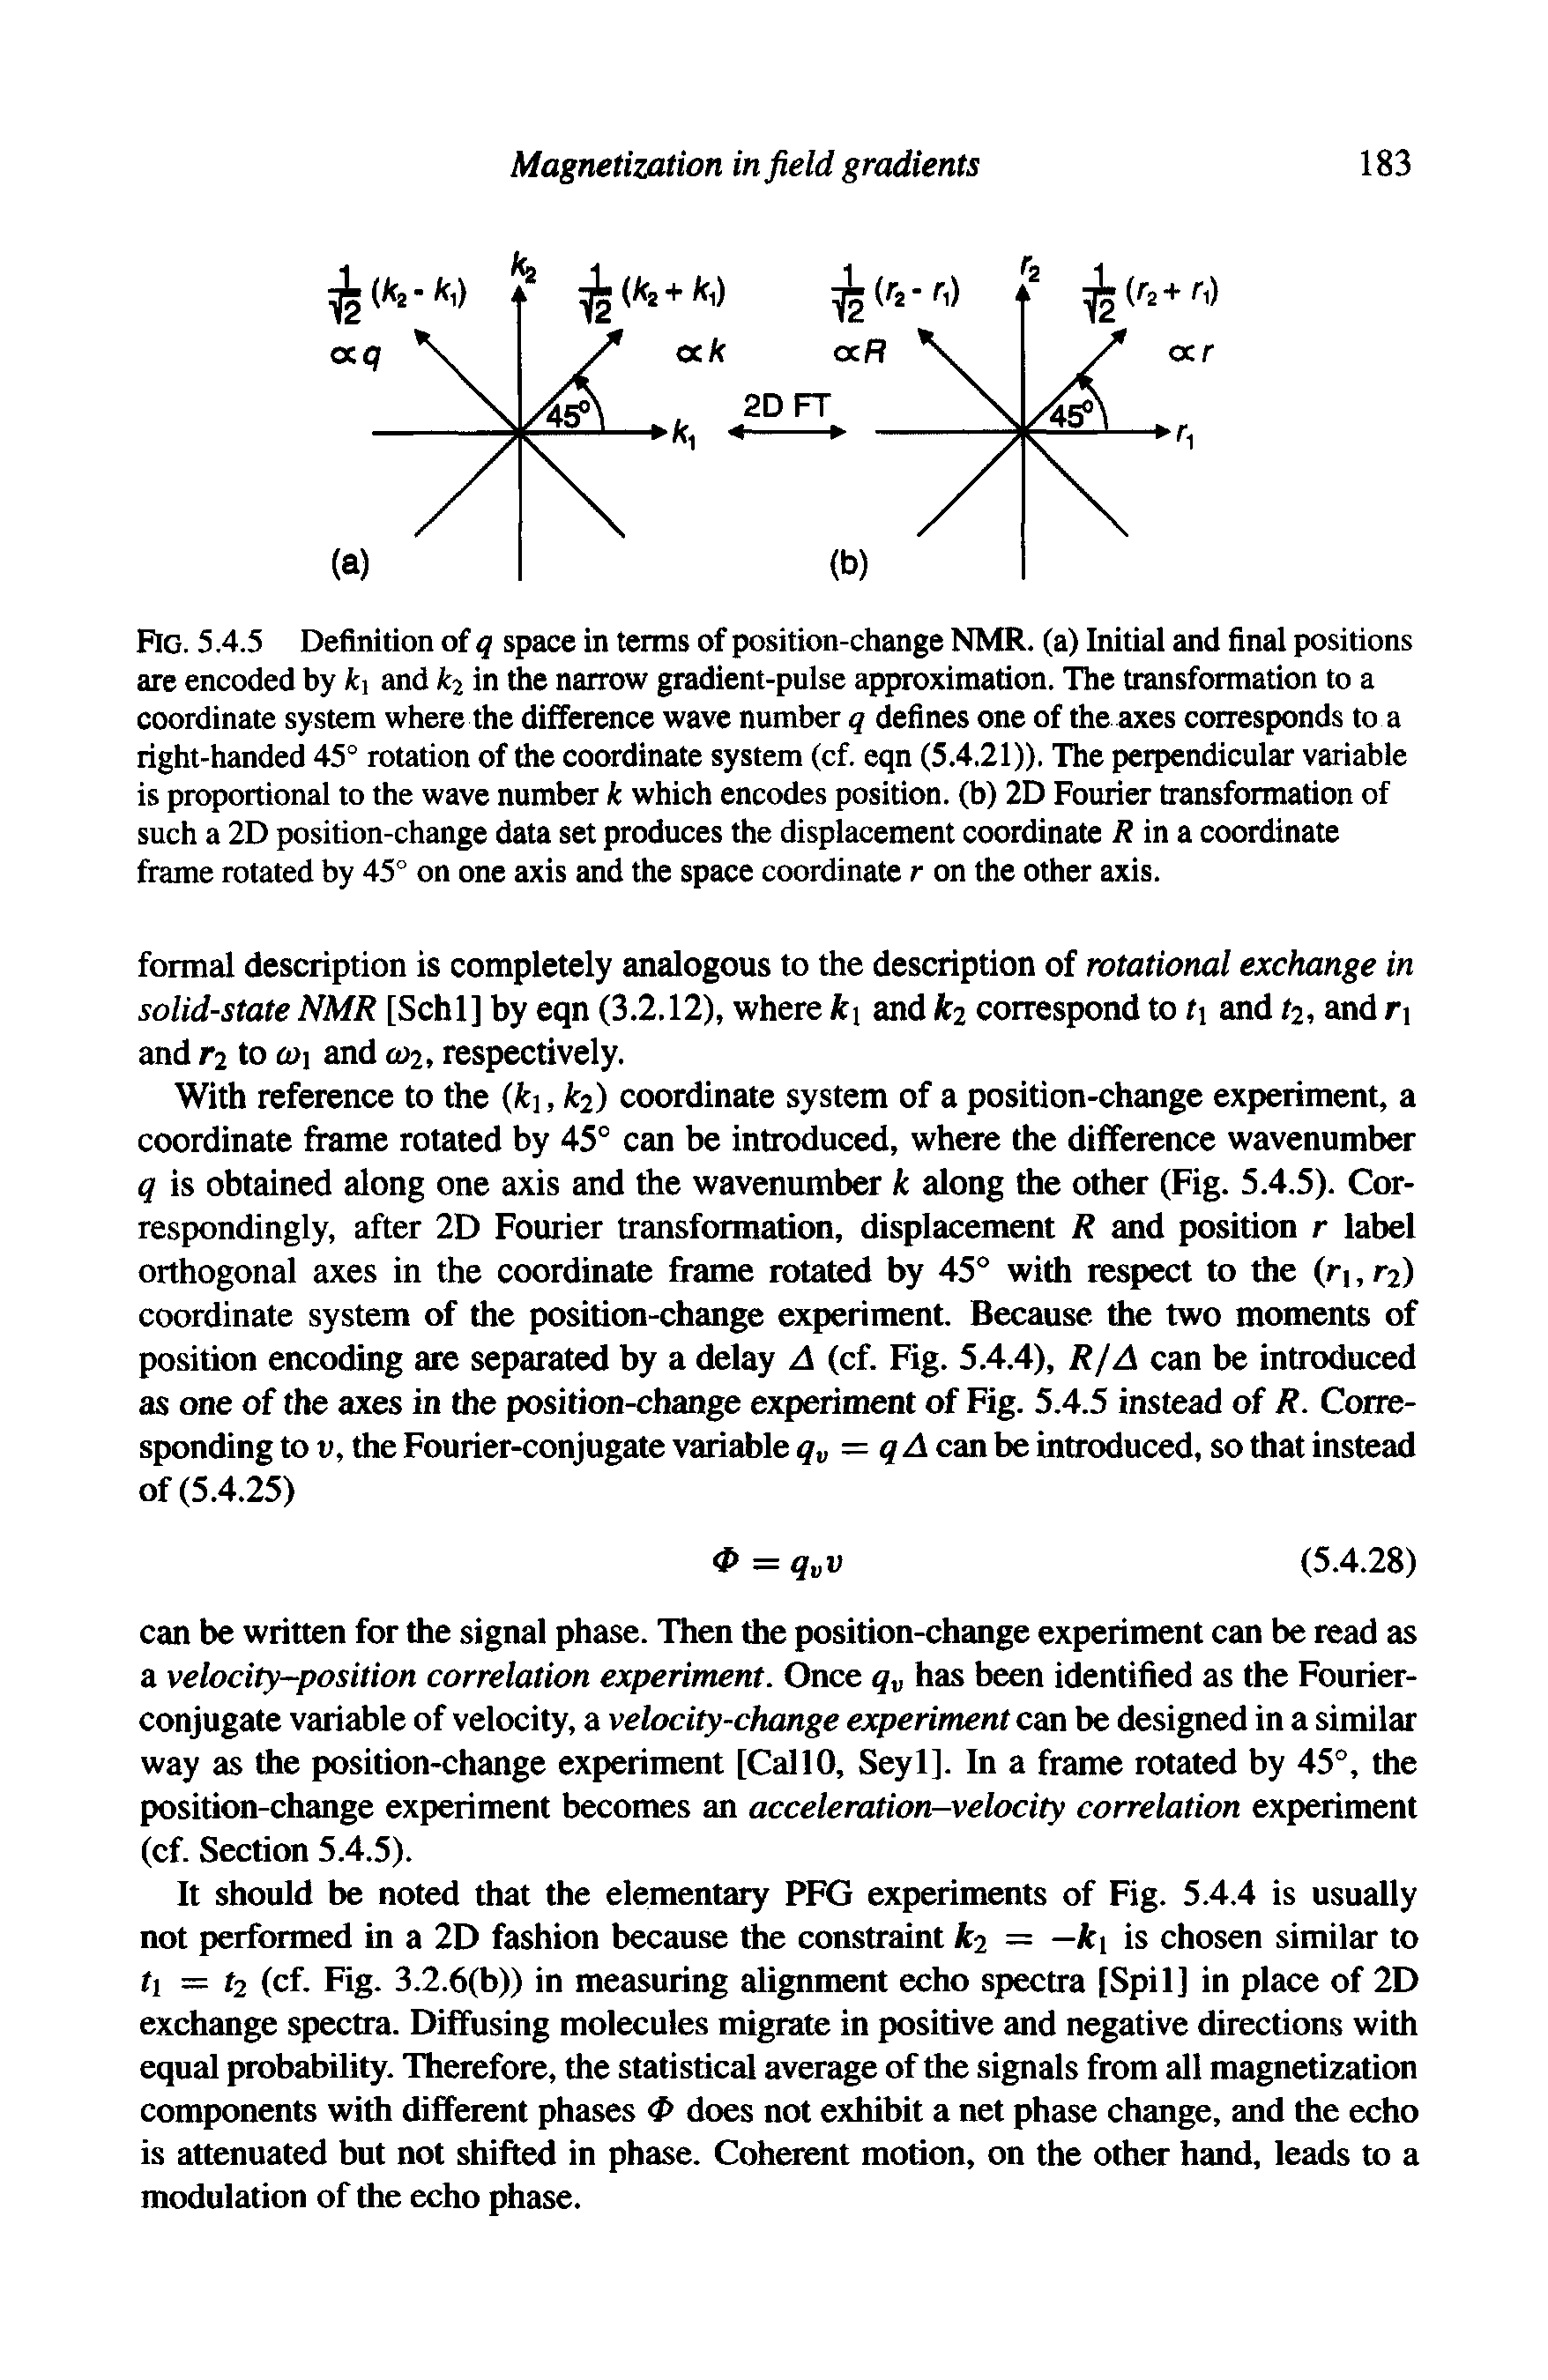 Fig. 5.4.5 Definition of q space in terms of position-change NMR. (a) Initial and final positions are encoded by fci and fea in the narrow gradient-pulse approximation. The transformation to a coordinate system where the difference wave number q defines one of the axes corresponds to a right-handed 45° rotation of the coordinate system (cf. eqn (5.4.21)). The perpendicular variable is proportional to the wave number k which encodes position, (b) 2D Fourier transformation of such a 2D position-change data set produces the displacement coordinate in a coordinate frame rotated by 45° on one axis and the space coordinate r on the other axis.